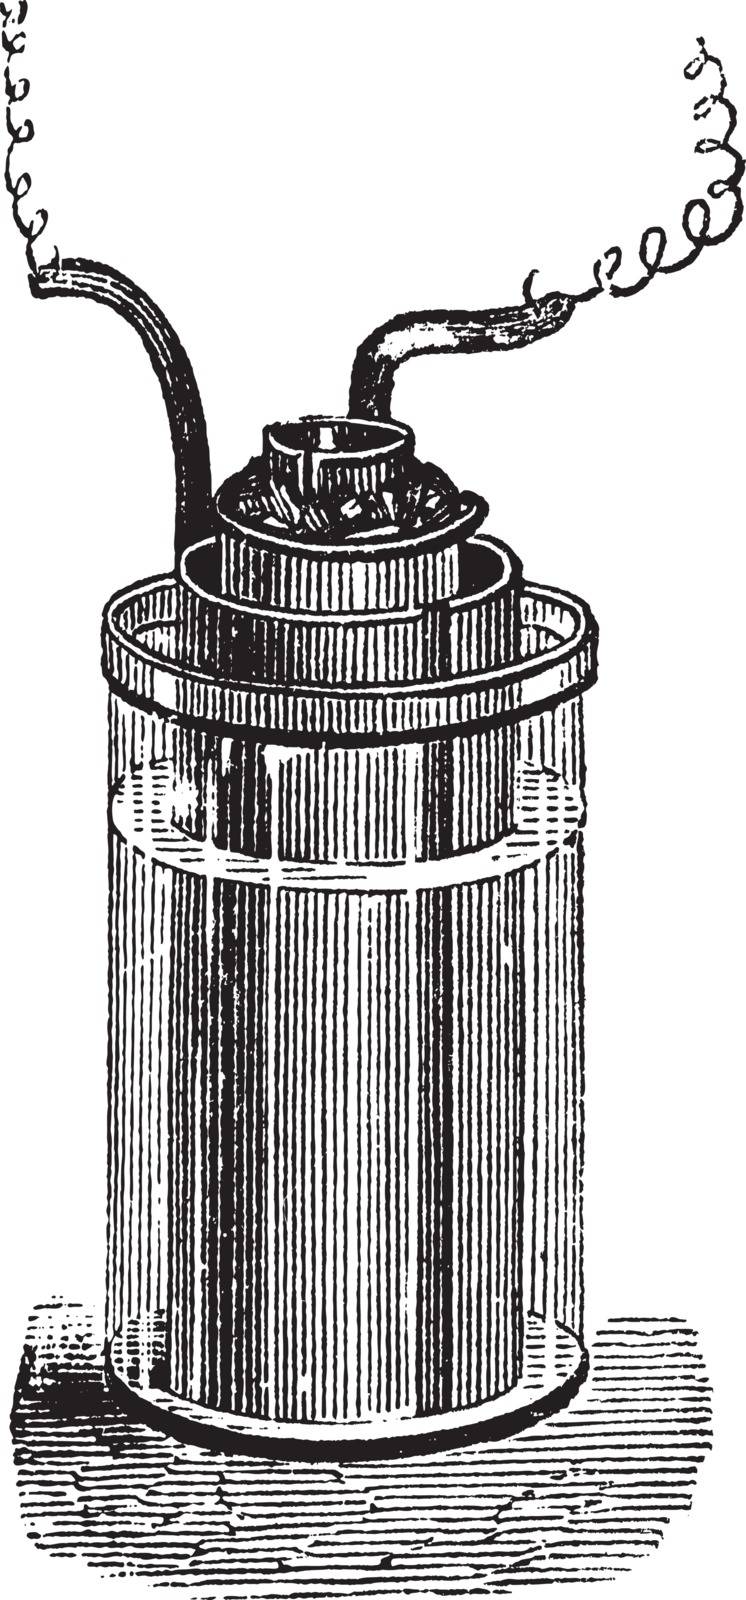 Daniell cell or gravity cell or crowfoot cell, vintage engraving. Old engraved illustration of Daniell cell, isolated on a white background.